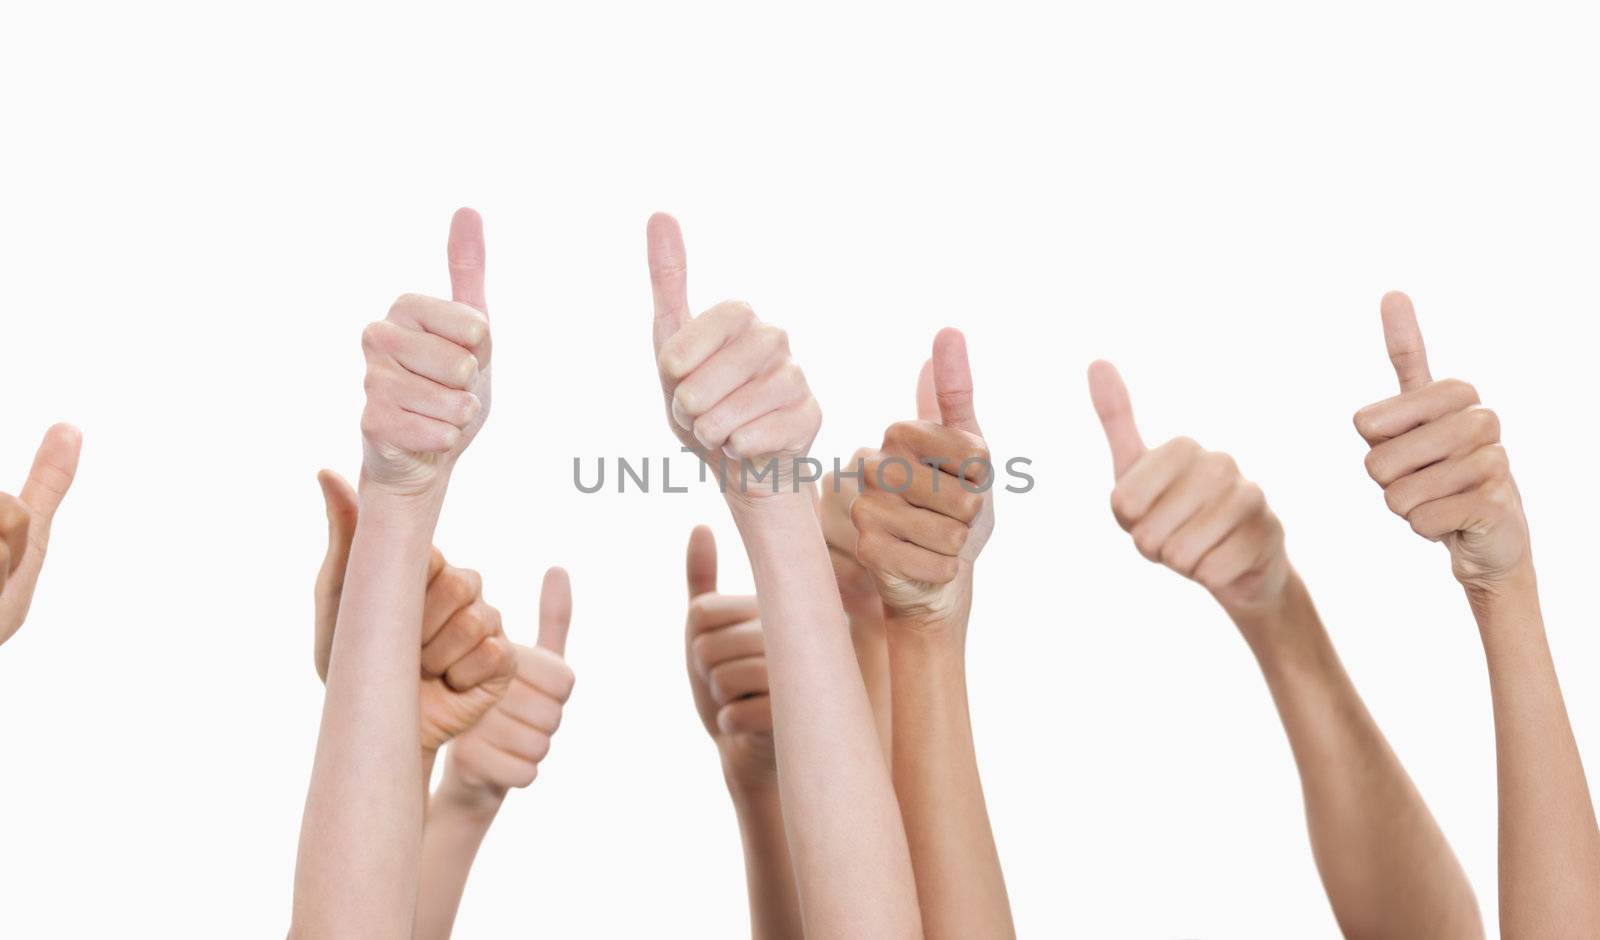 Thumbs raised and hands up against white background